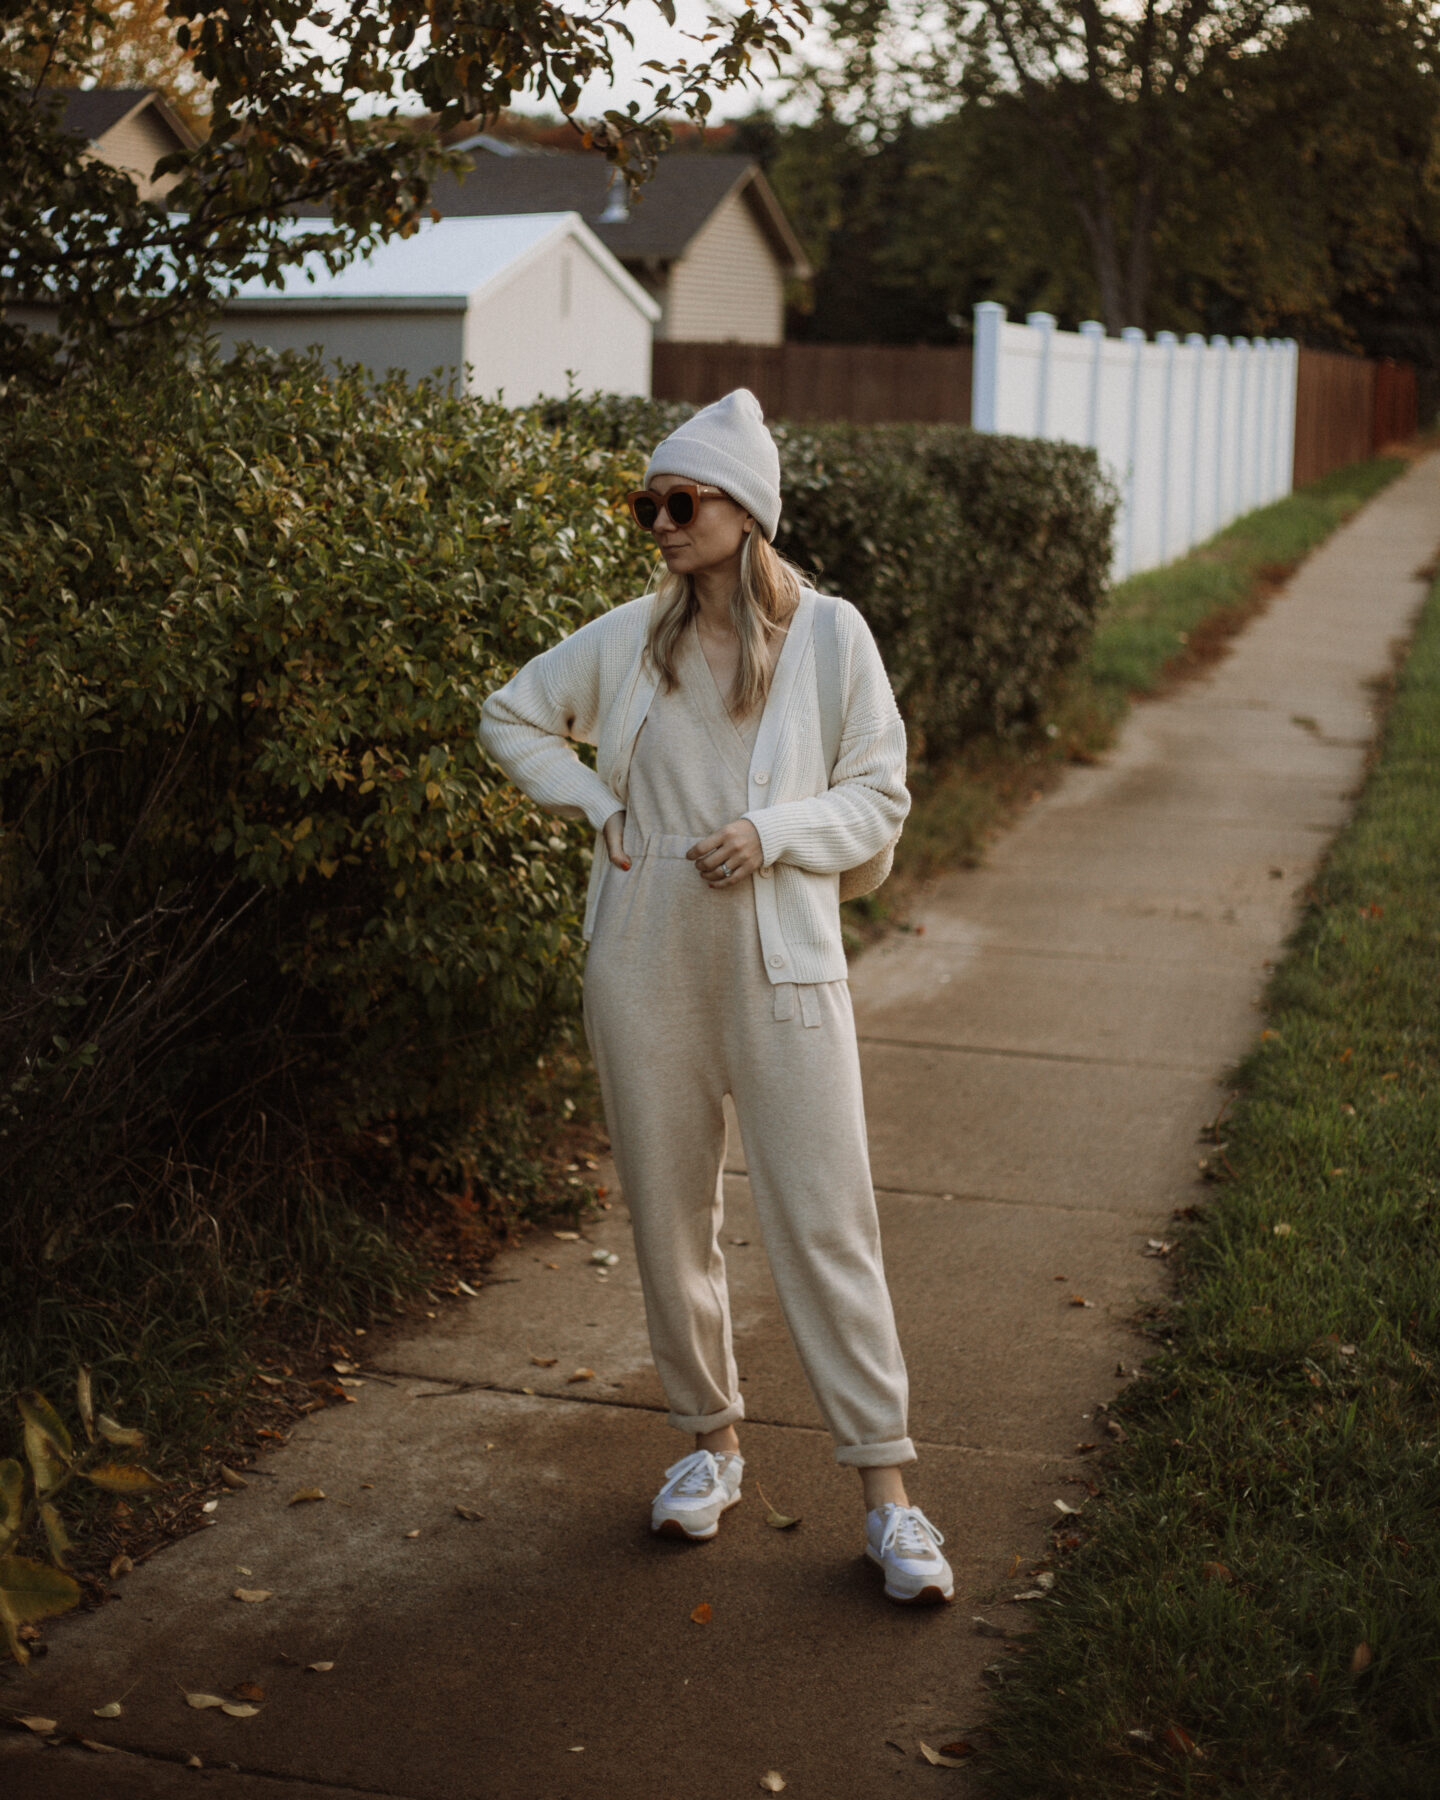 Karin Emily wears the Tradlands Shelter Cardigan, a J Crew Wool Jumpsuit and Sneakers and a Sherpa Backpack